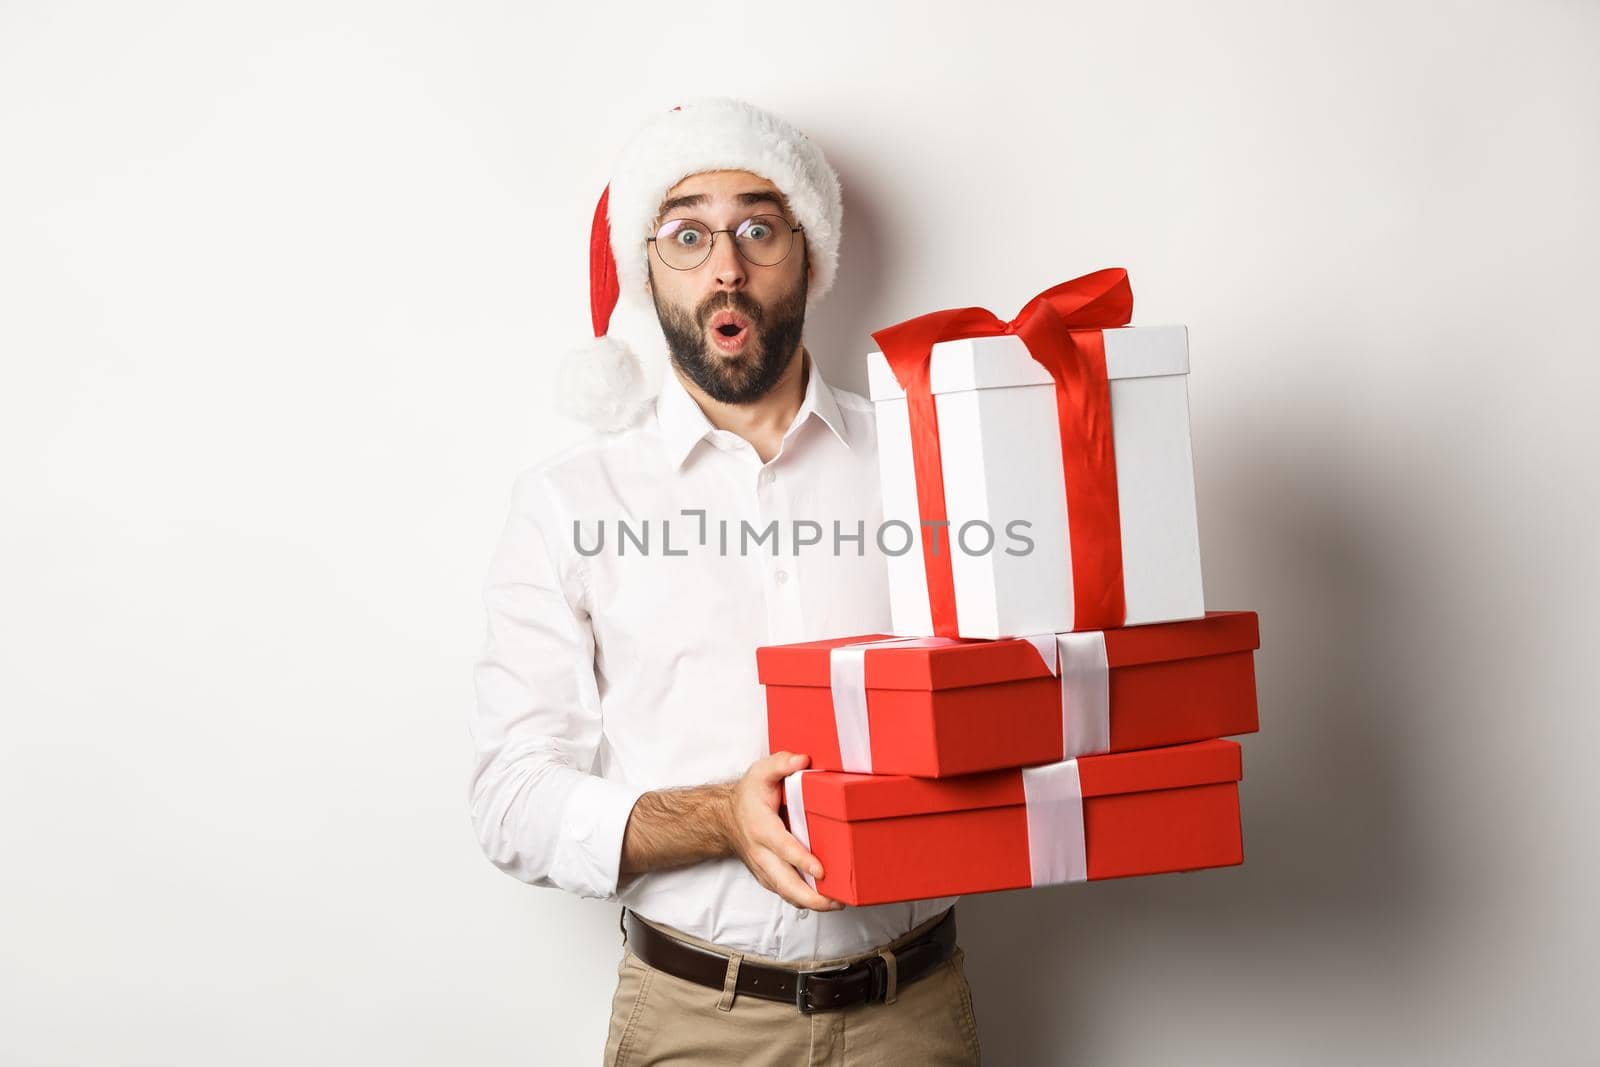 Winter holidays and celebration. Excited man holding Christmas gifts and looking surprised, wearing Santa hat, standing over white background.